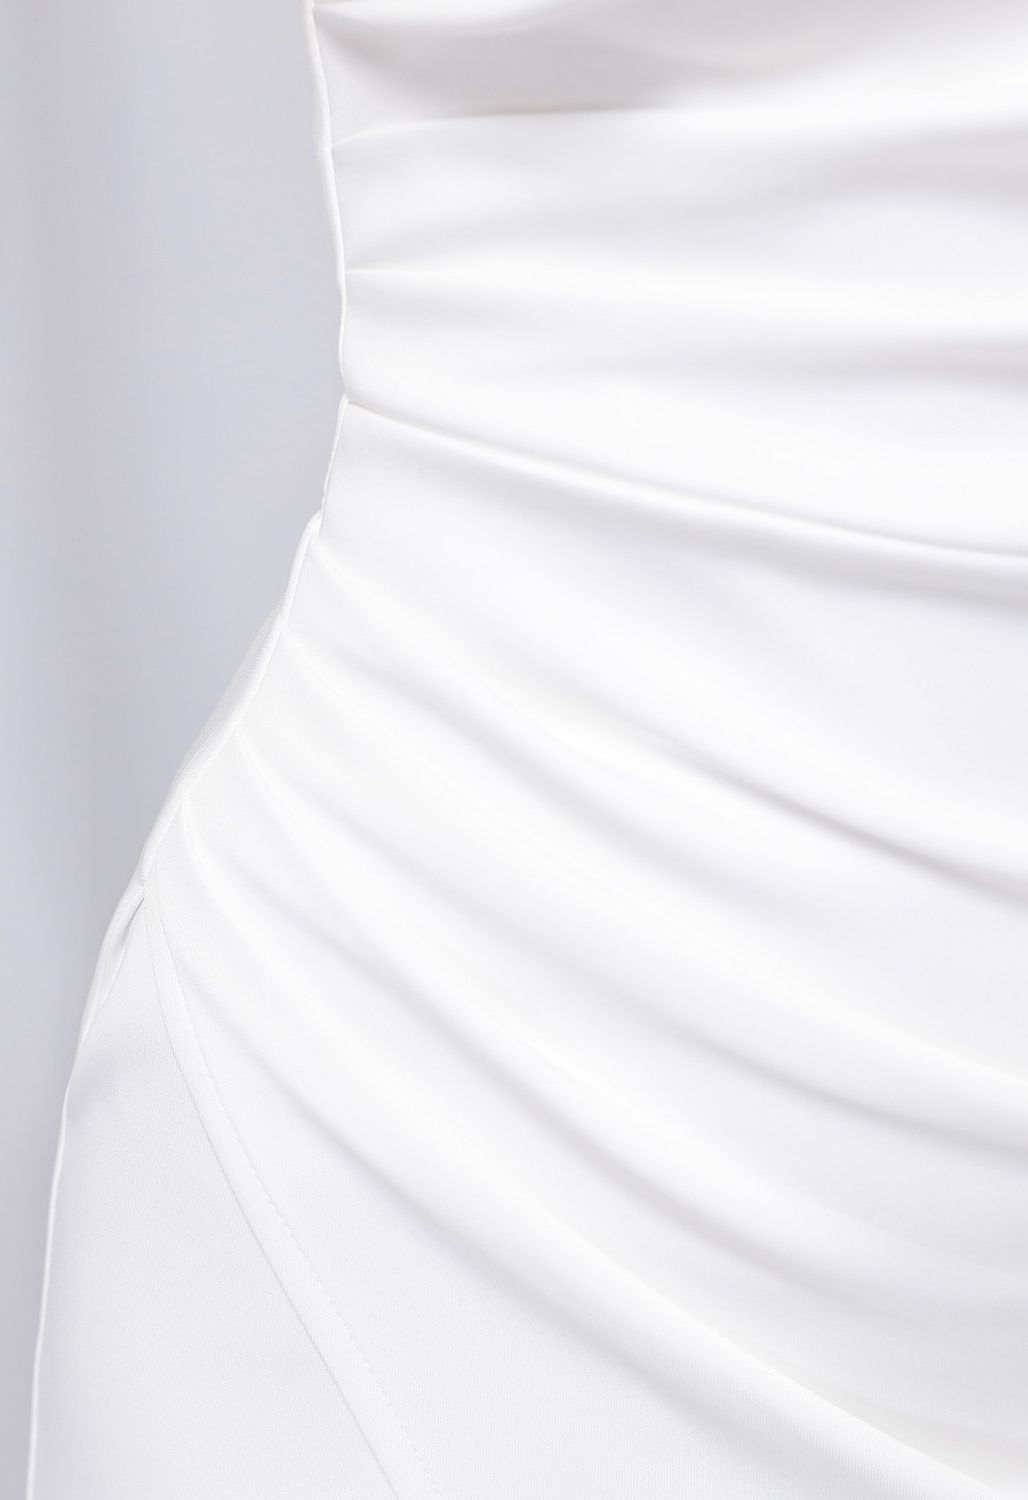 Single Strap Front Slit Gown in White